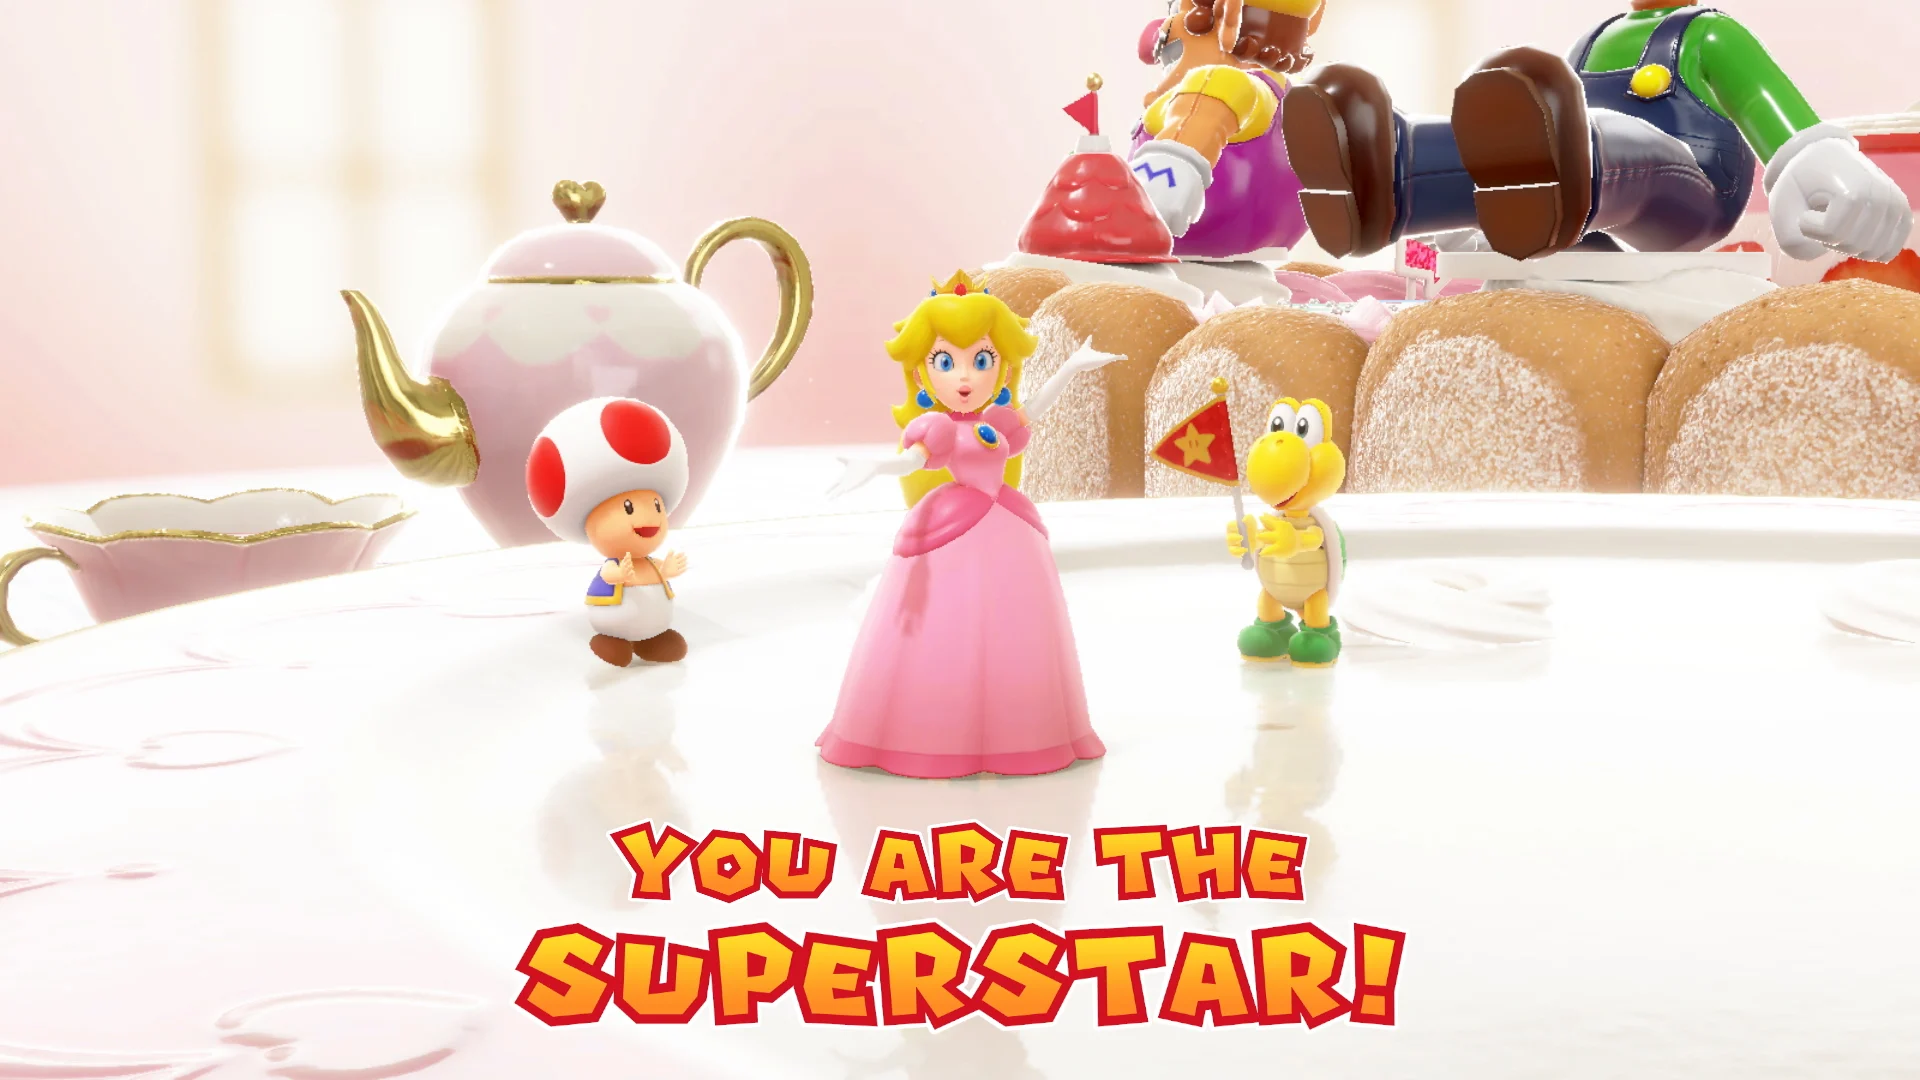 MPS_Peach%27s_Birthday_Cake_Victory.png